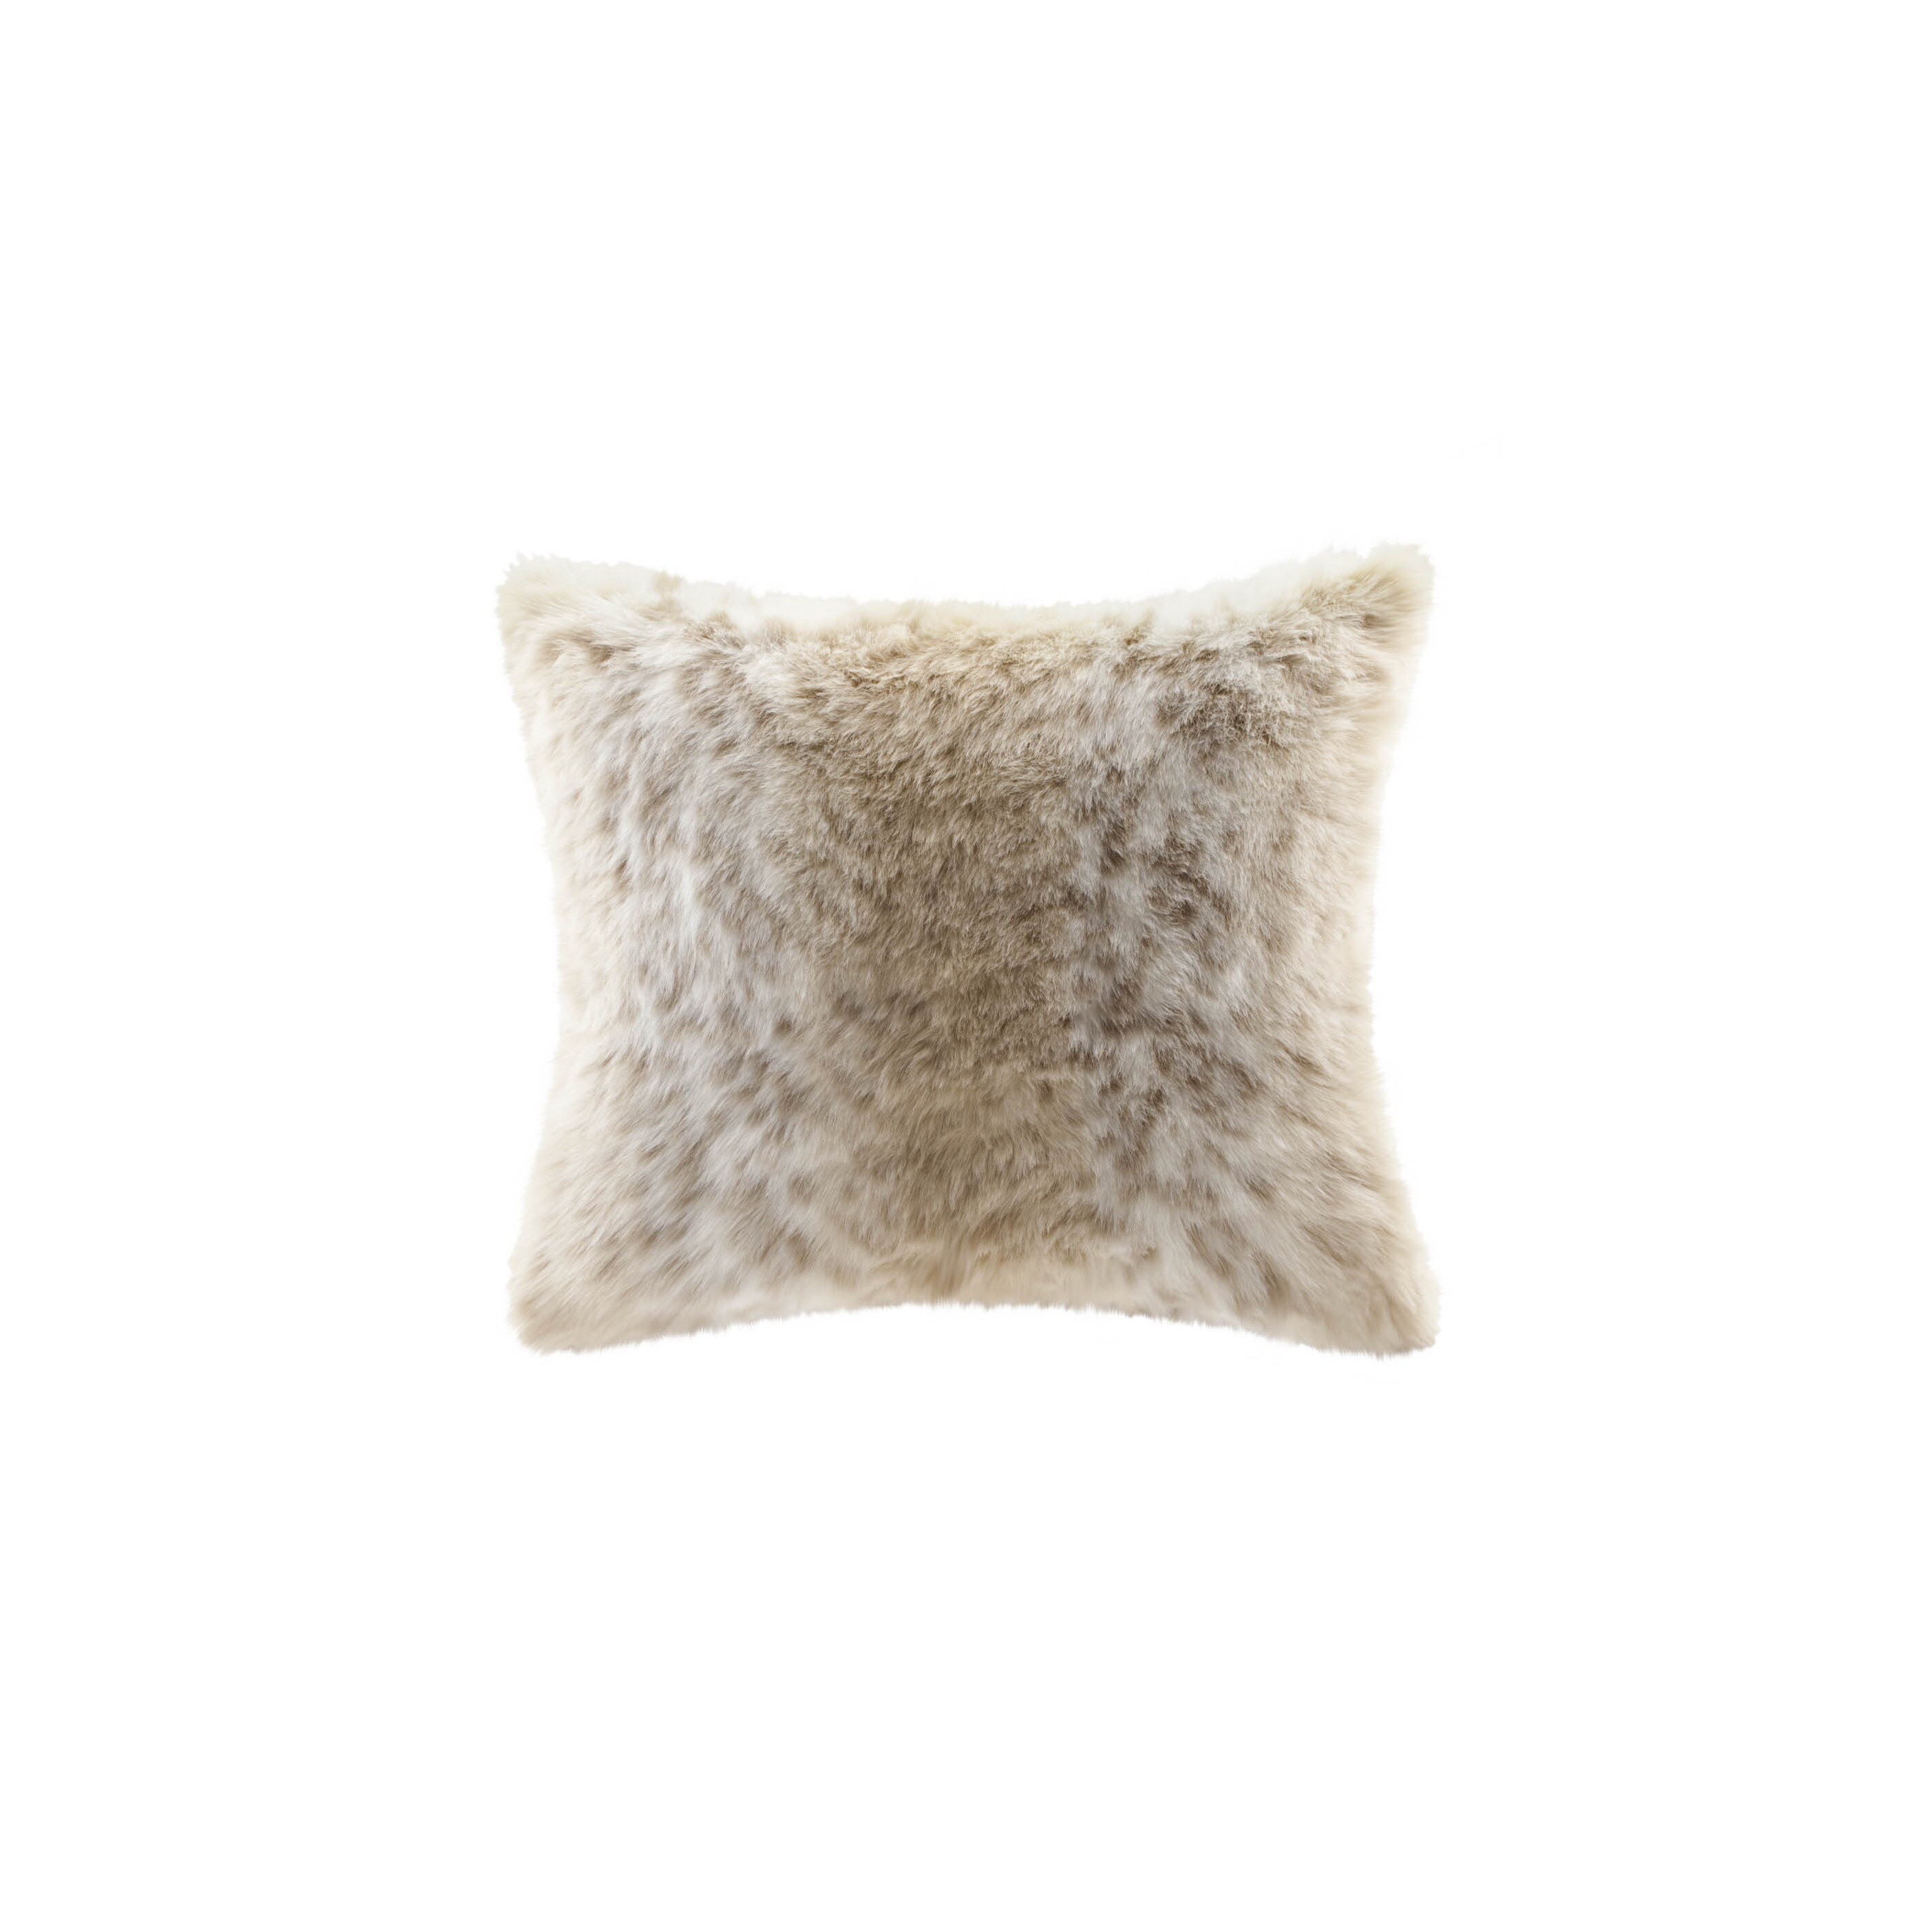 Cheer Collection Luxurious Faux Fur Throw Pillows Set Of 2 - White (18 X 18)  : Target